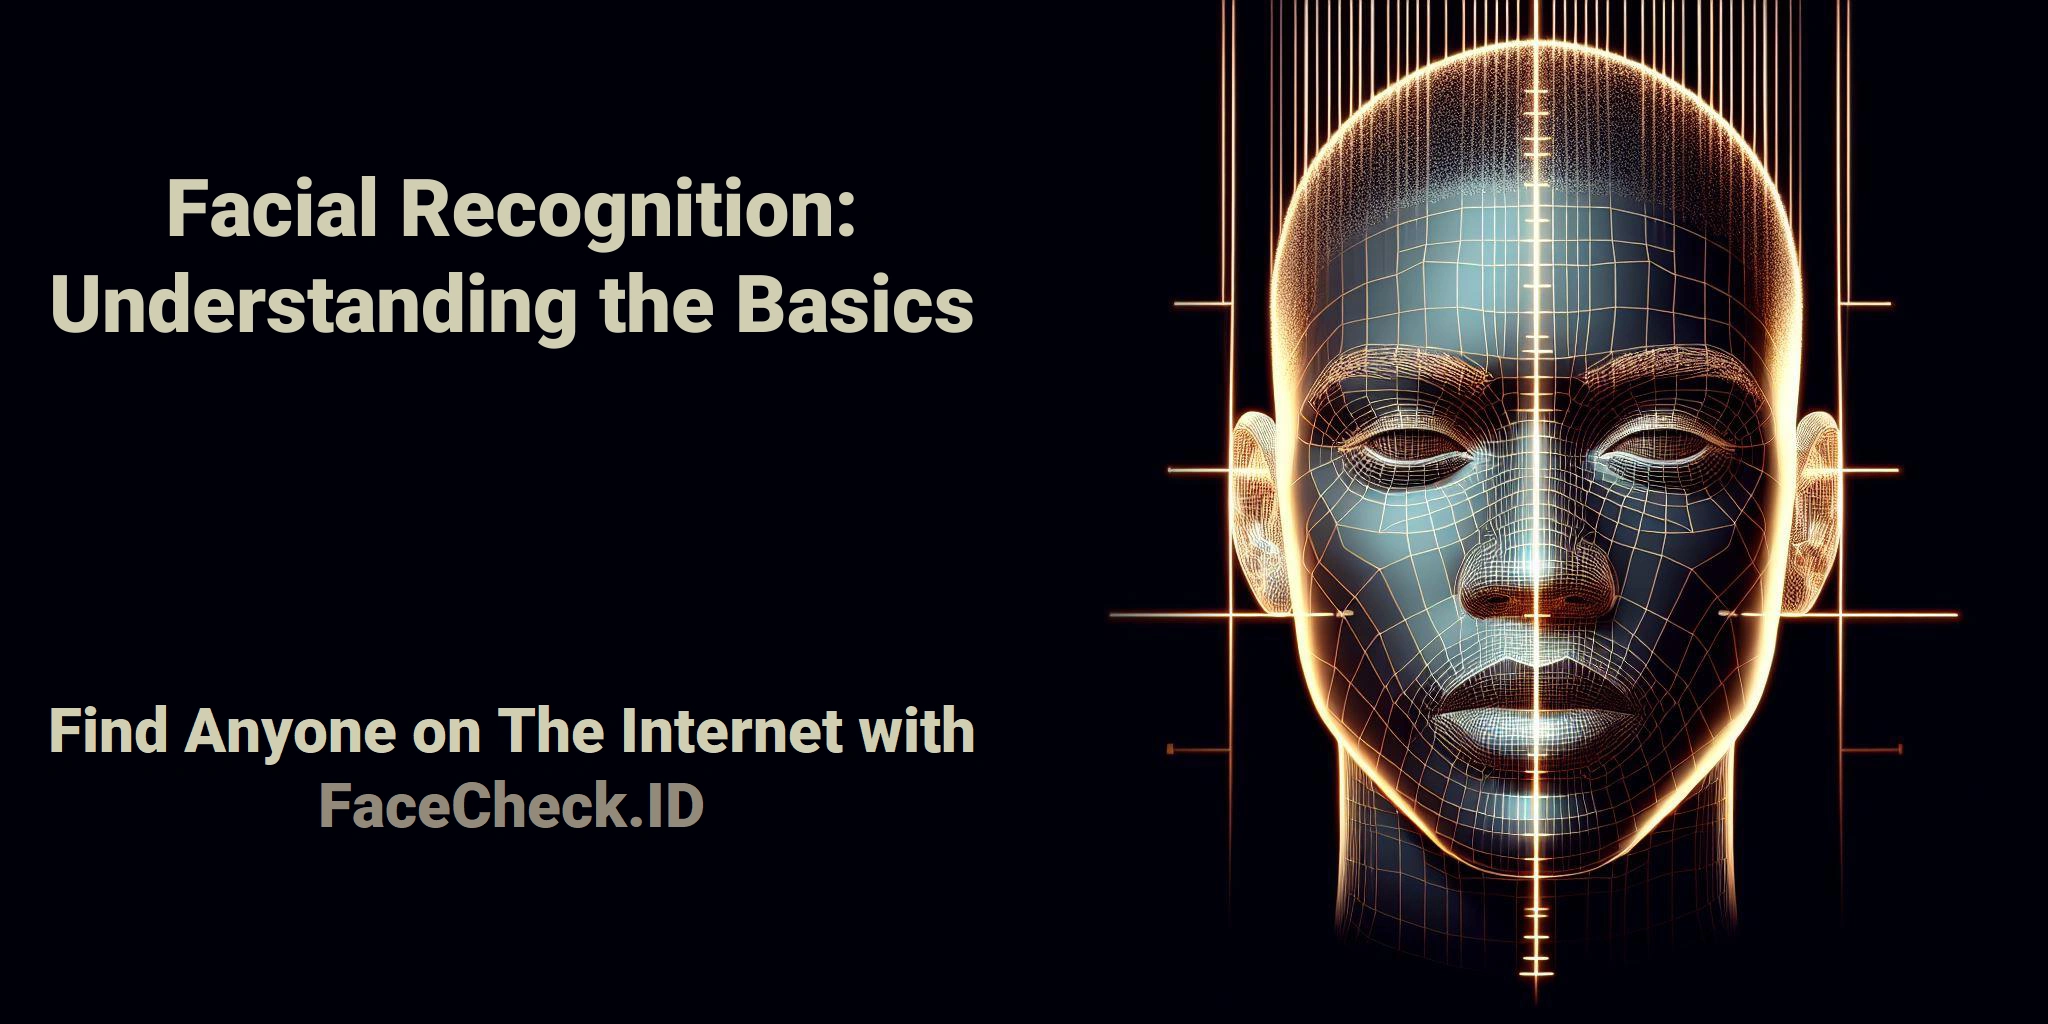 Facial Recognition: Understanding the Basics Find Anyone on The Internet with FaceCheck.ID